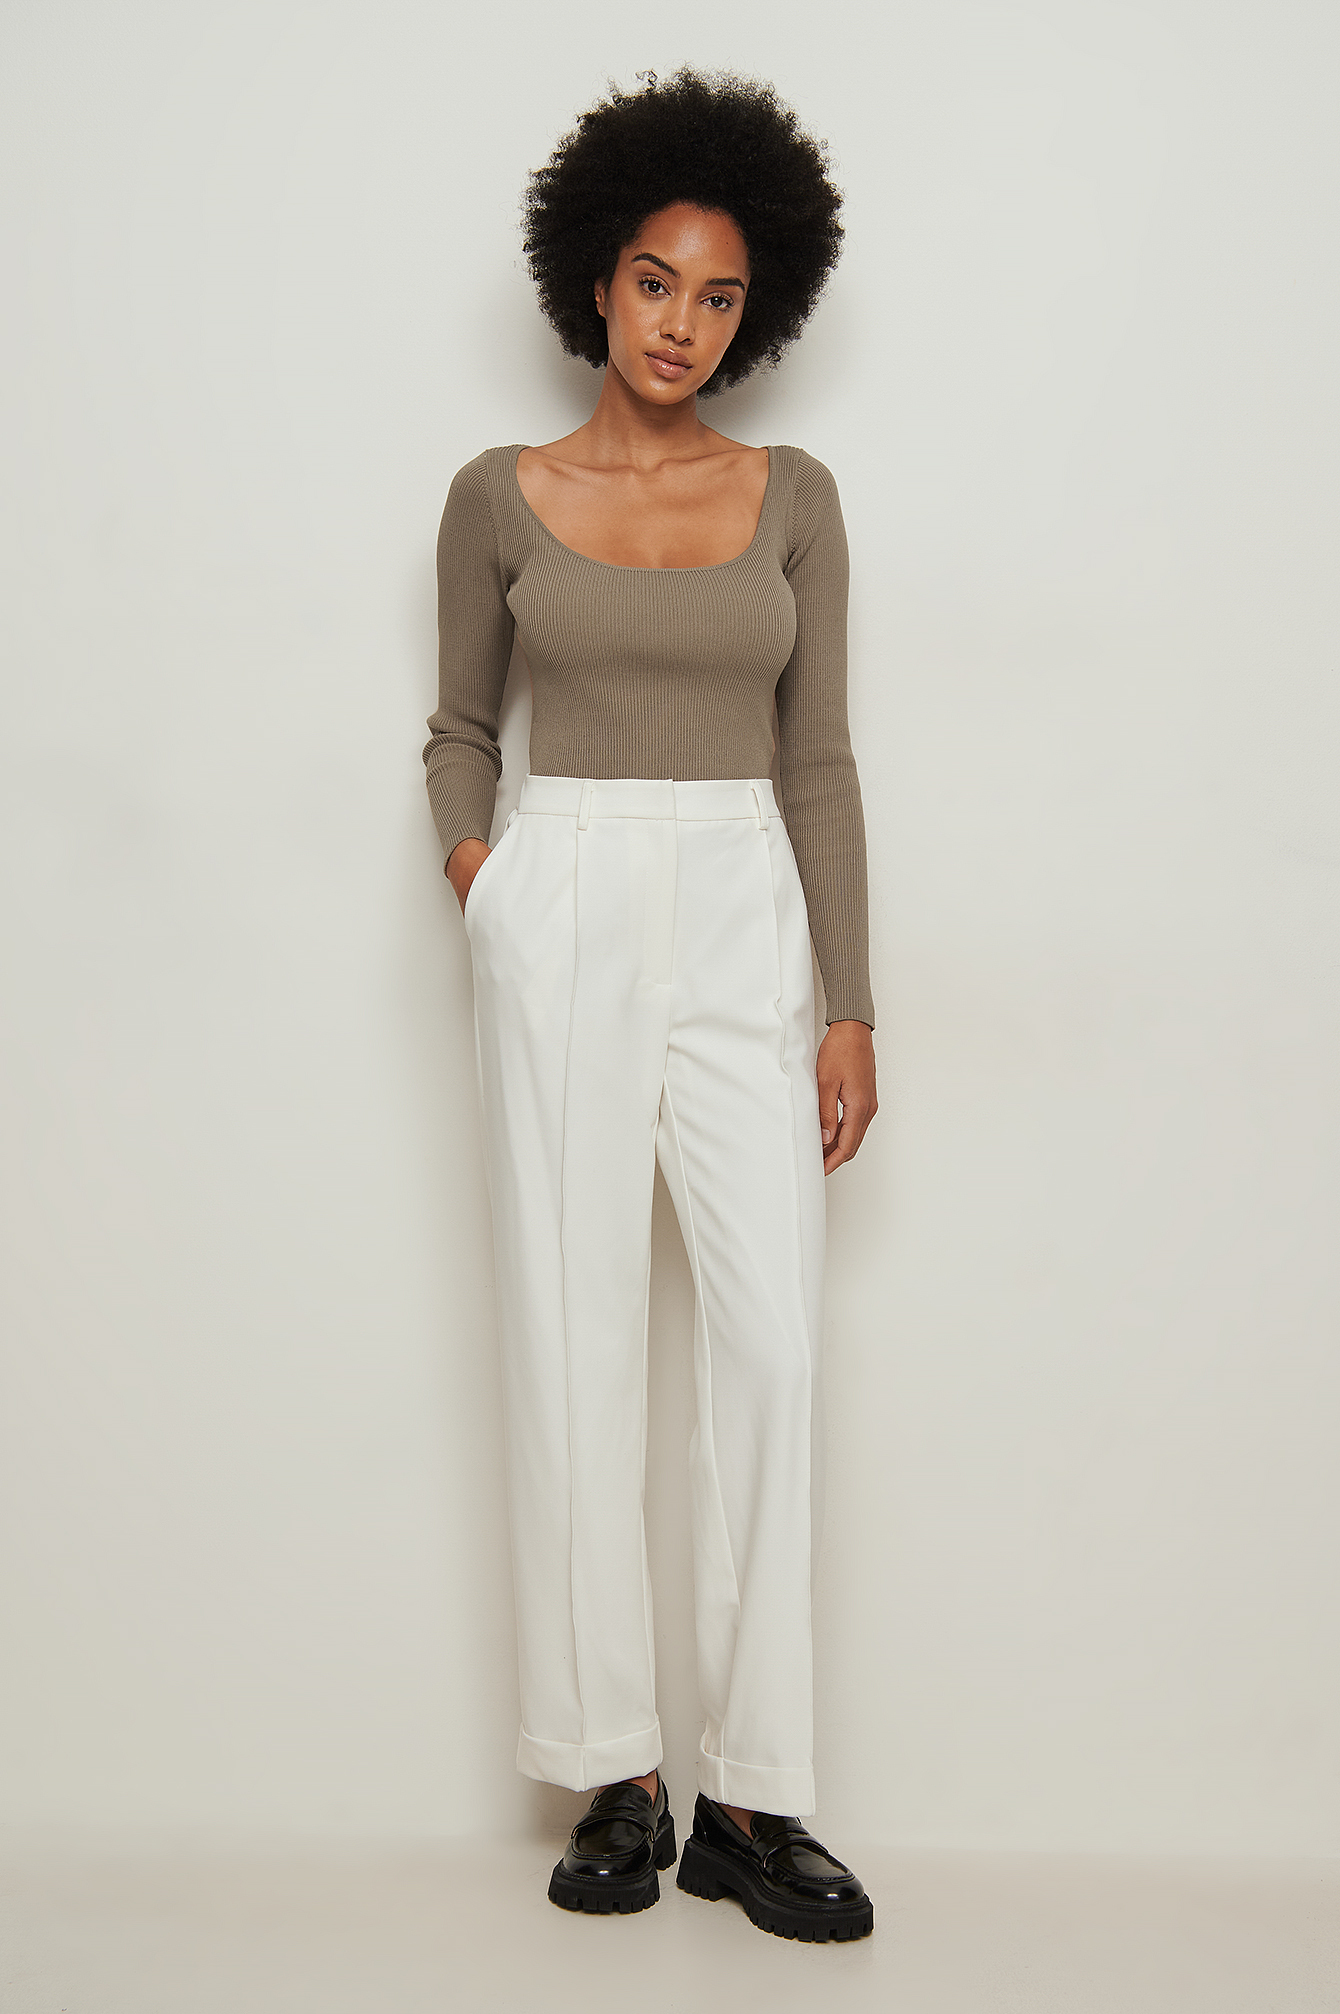 Deep Round Neck Ribbed Knitted Sweater Outfit.